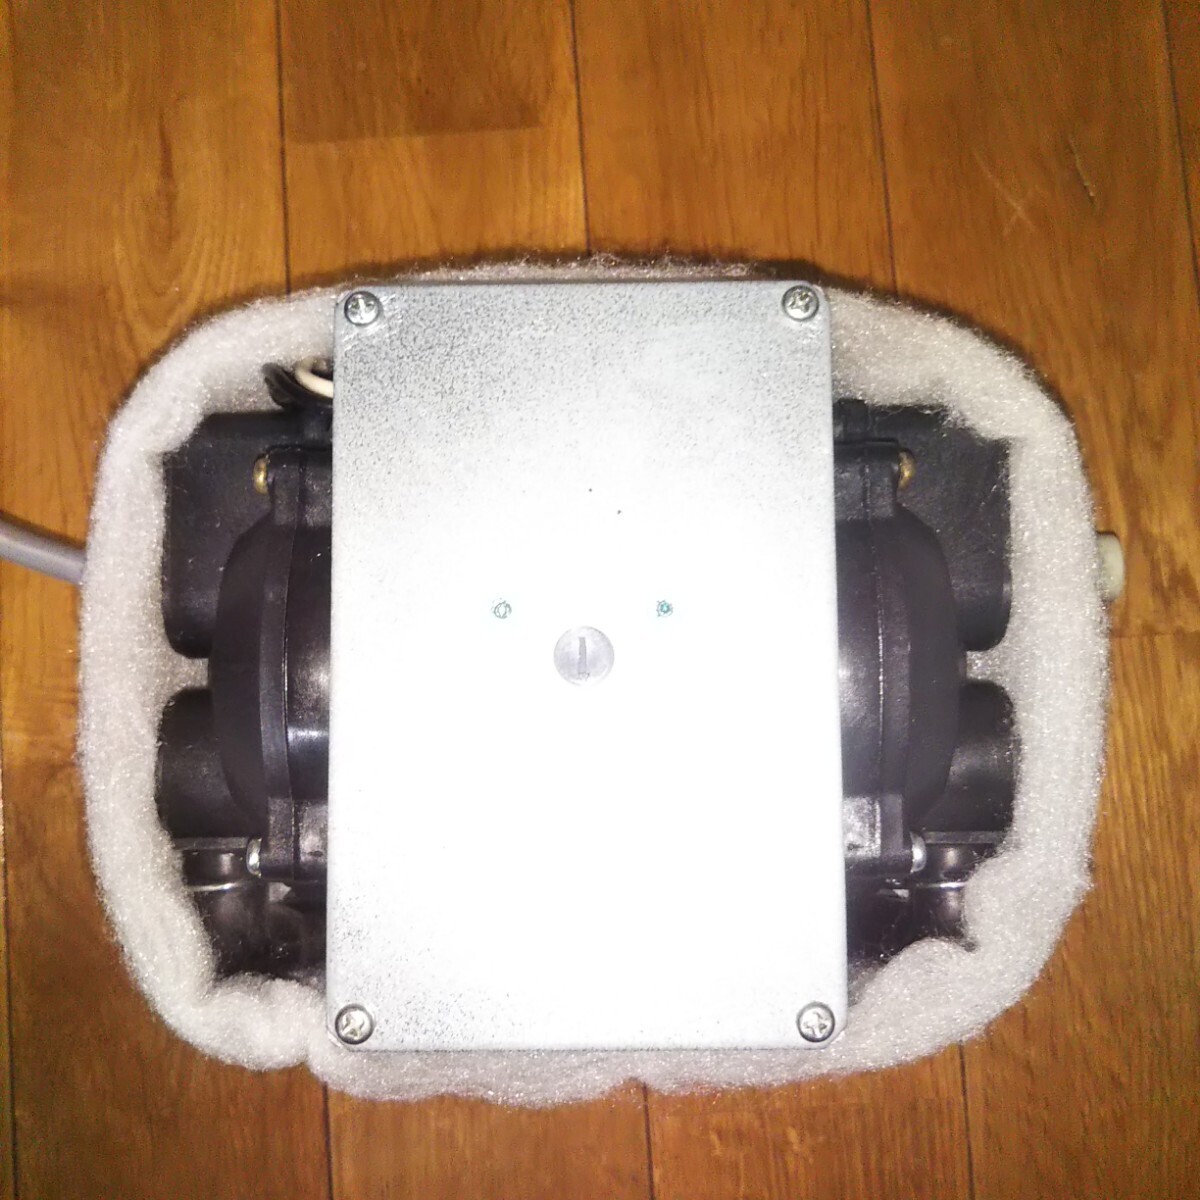 ... almost new goods almost unused beautiful goods blower blower diaphragm blower air pump cheap . air pump LP-100H air flow 100L/min working properly goods 